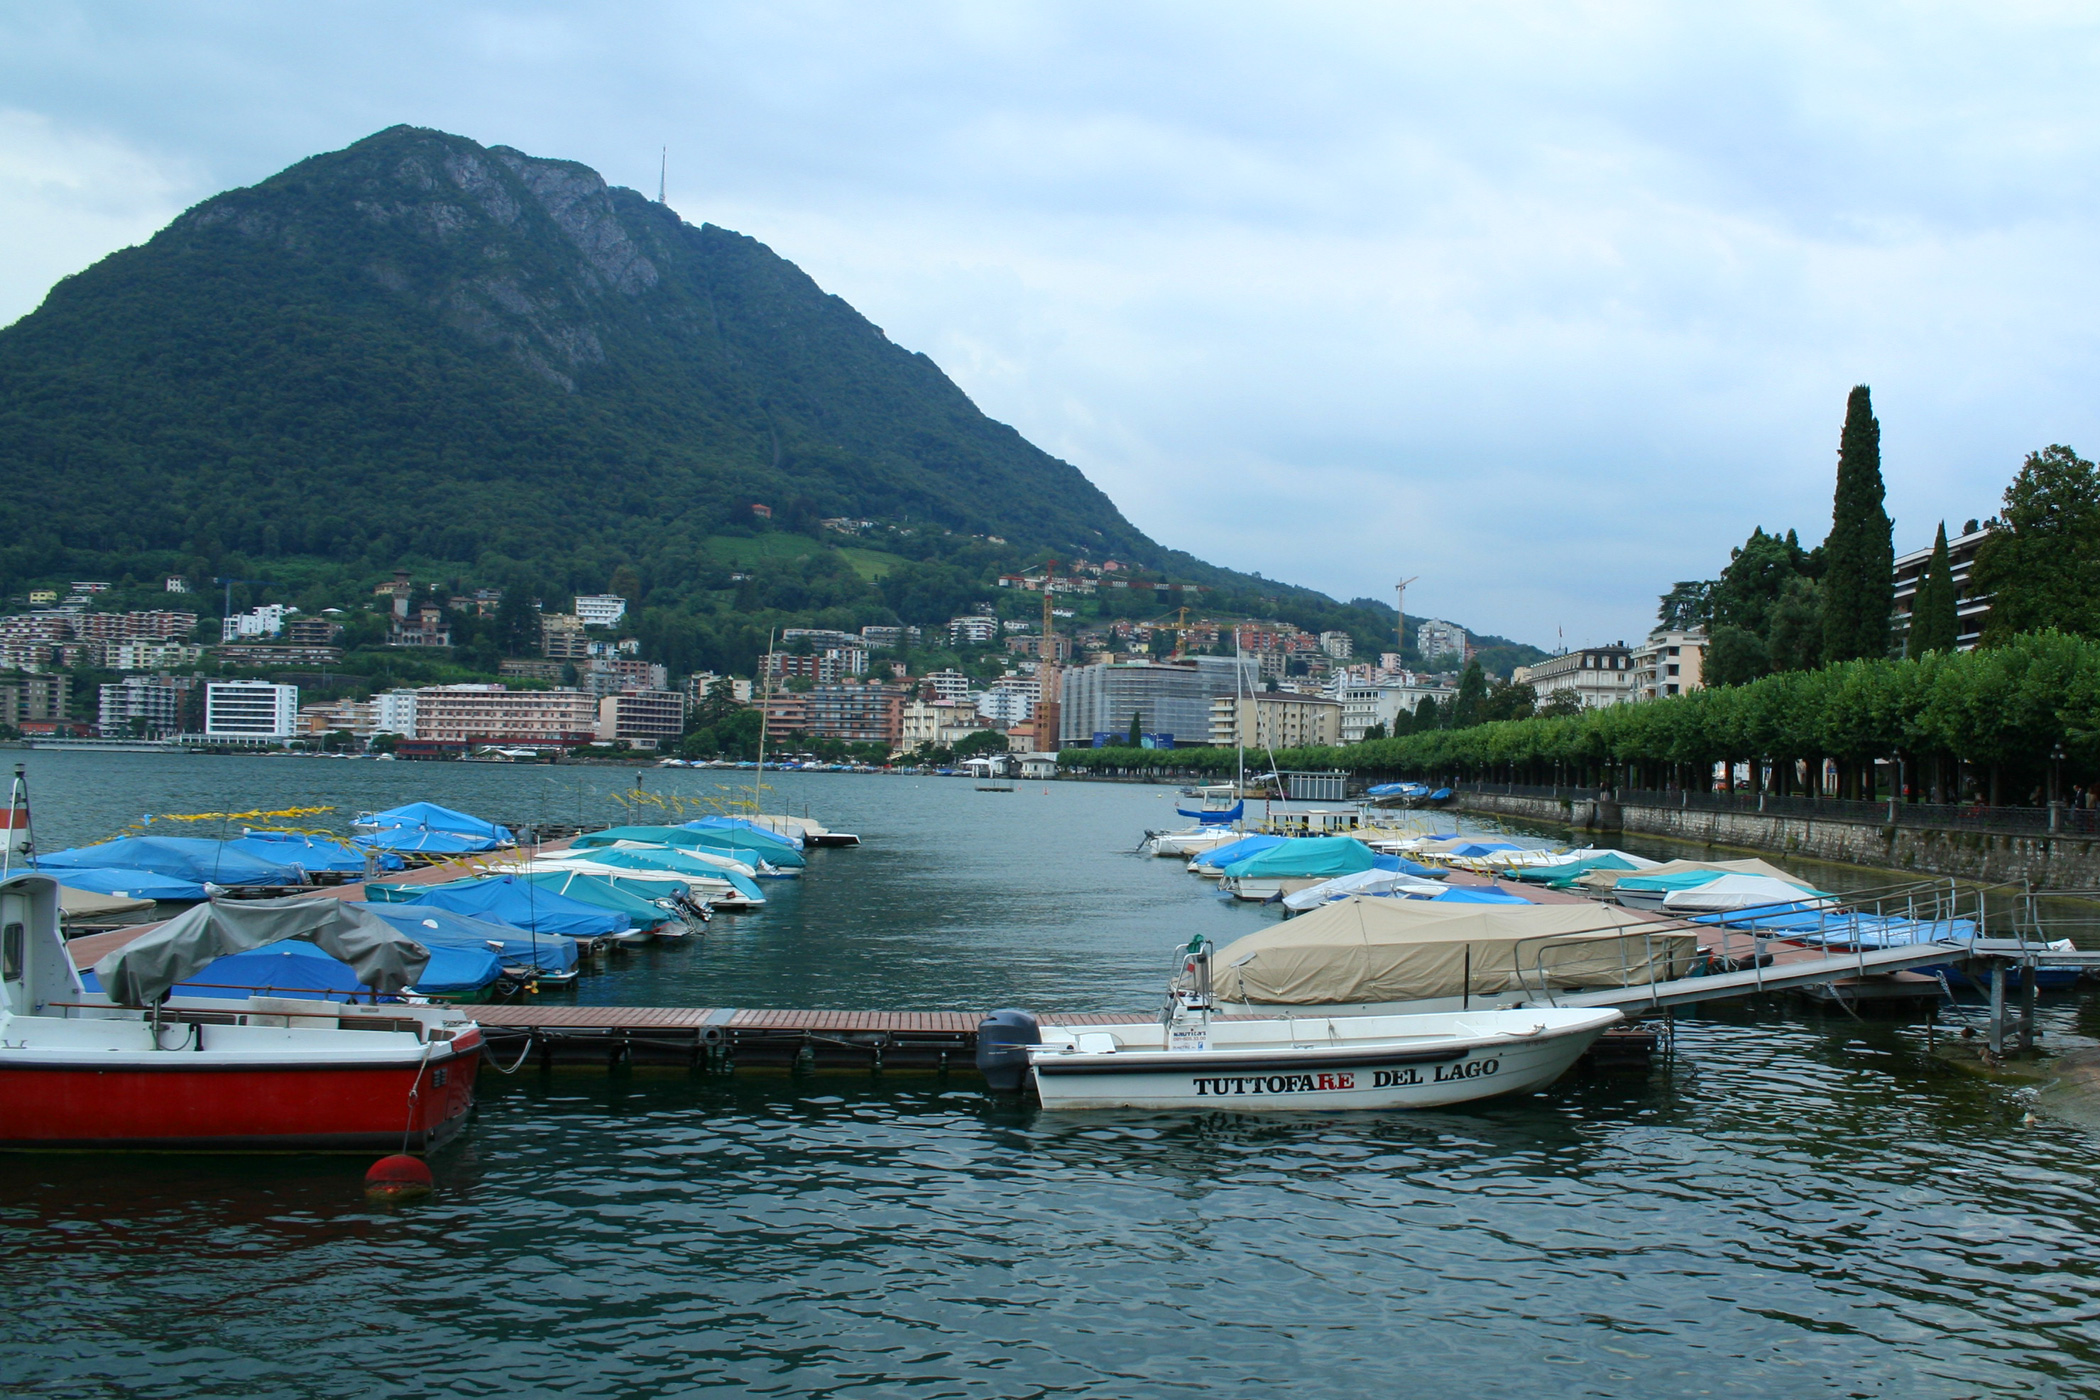 Small boats on a lake in Italy